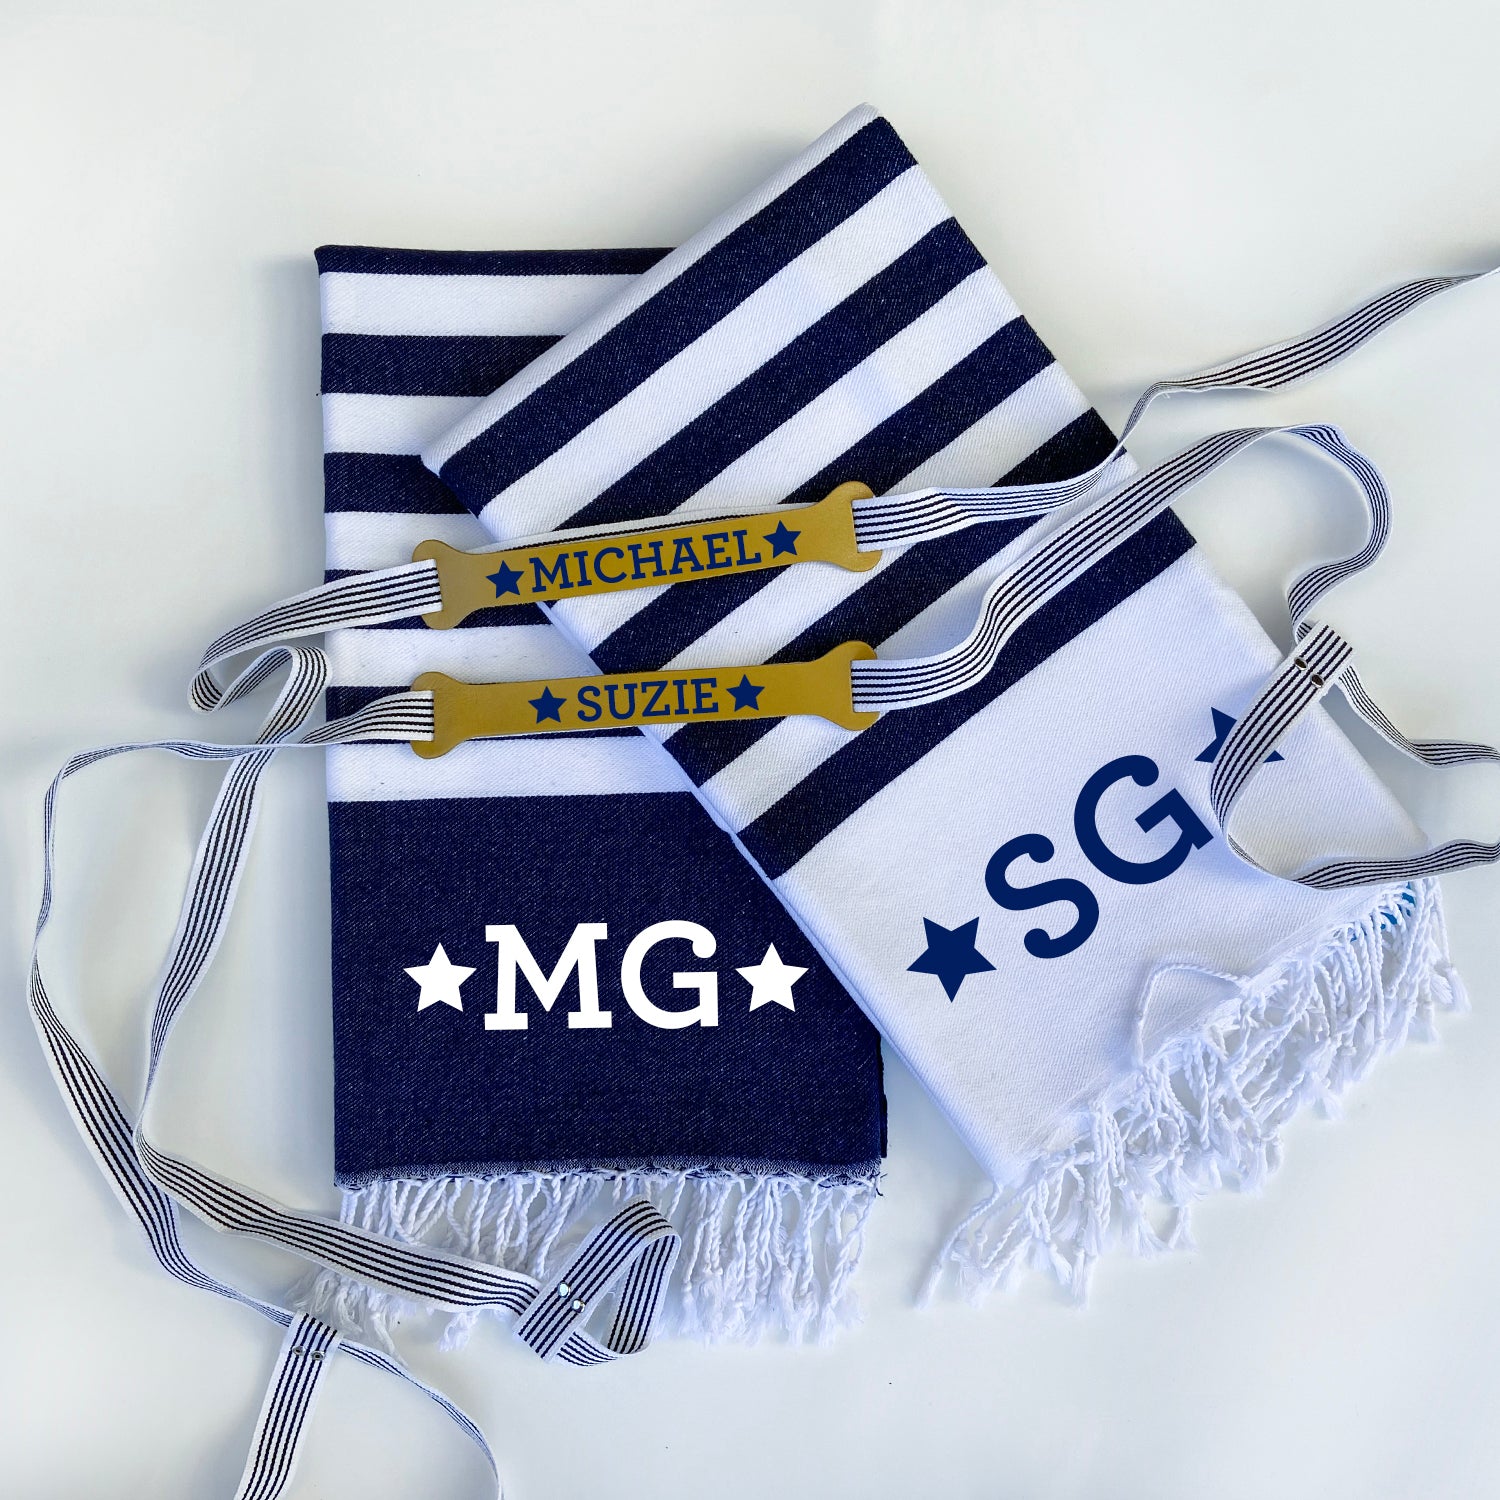 MARINE Beach Towel and carrier strap